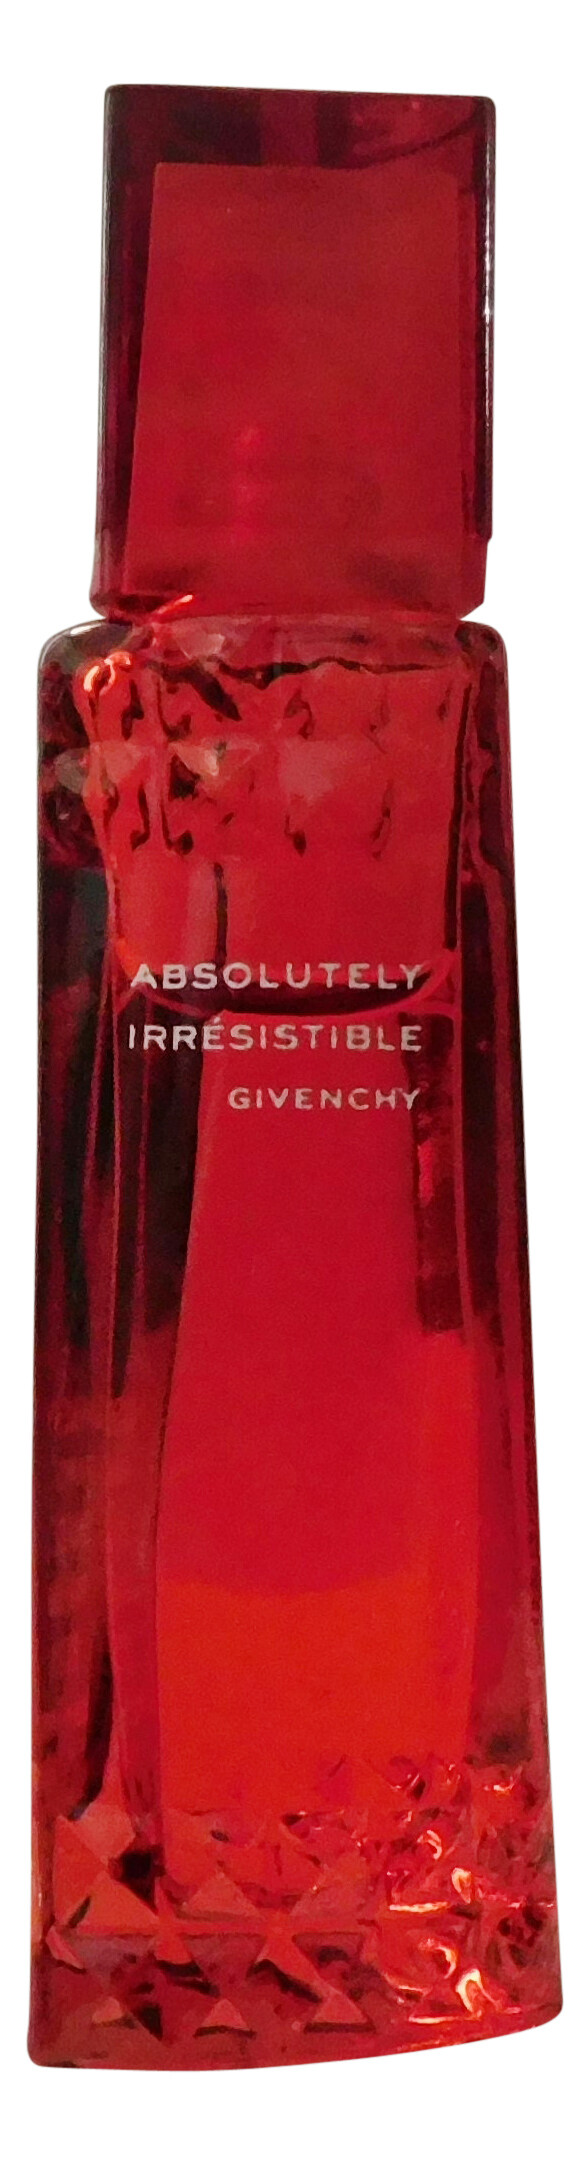 absolute irresistible givenchy